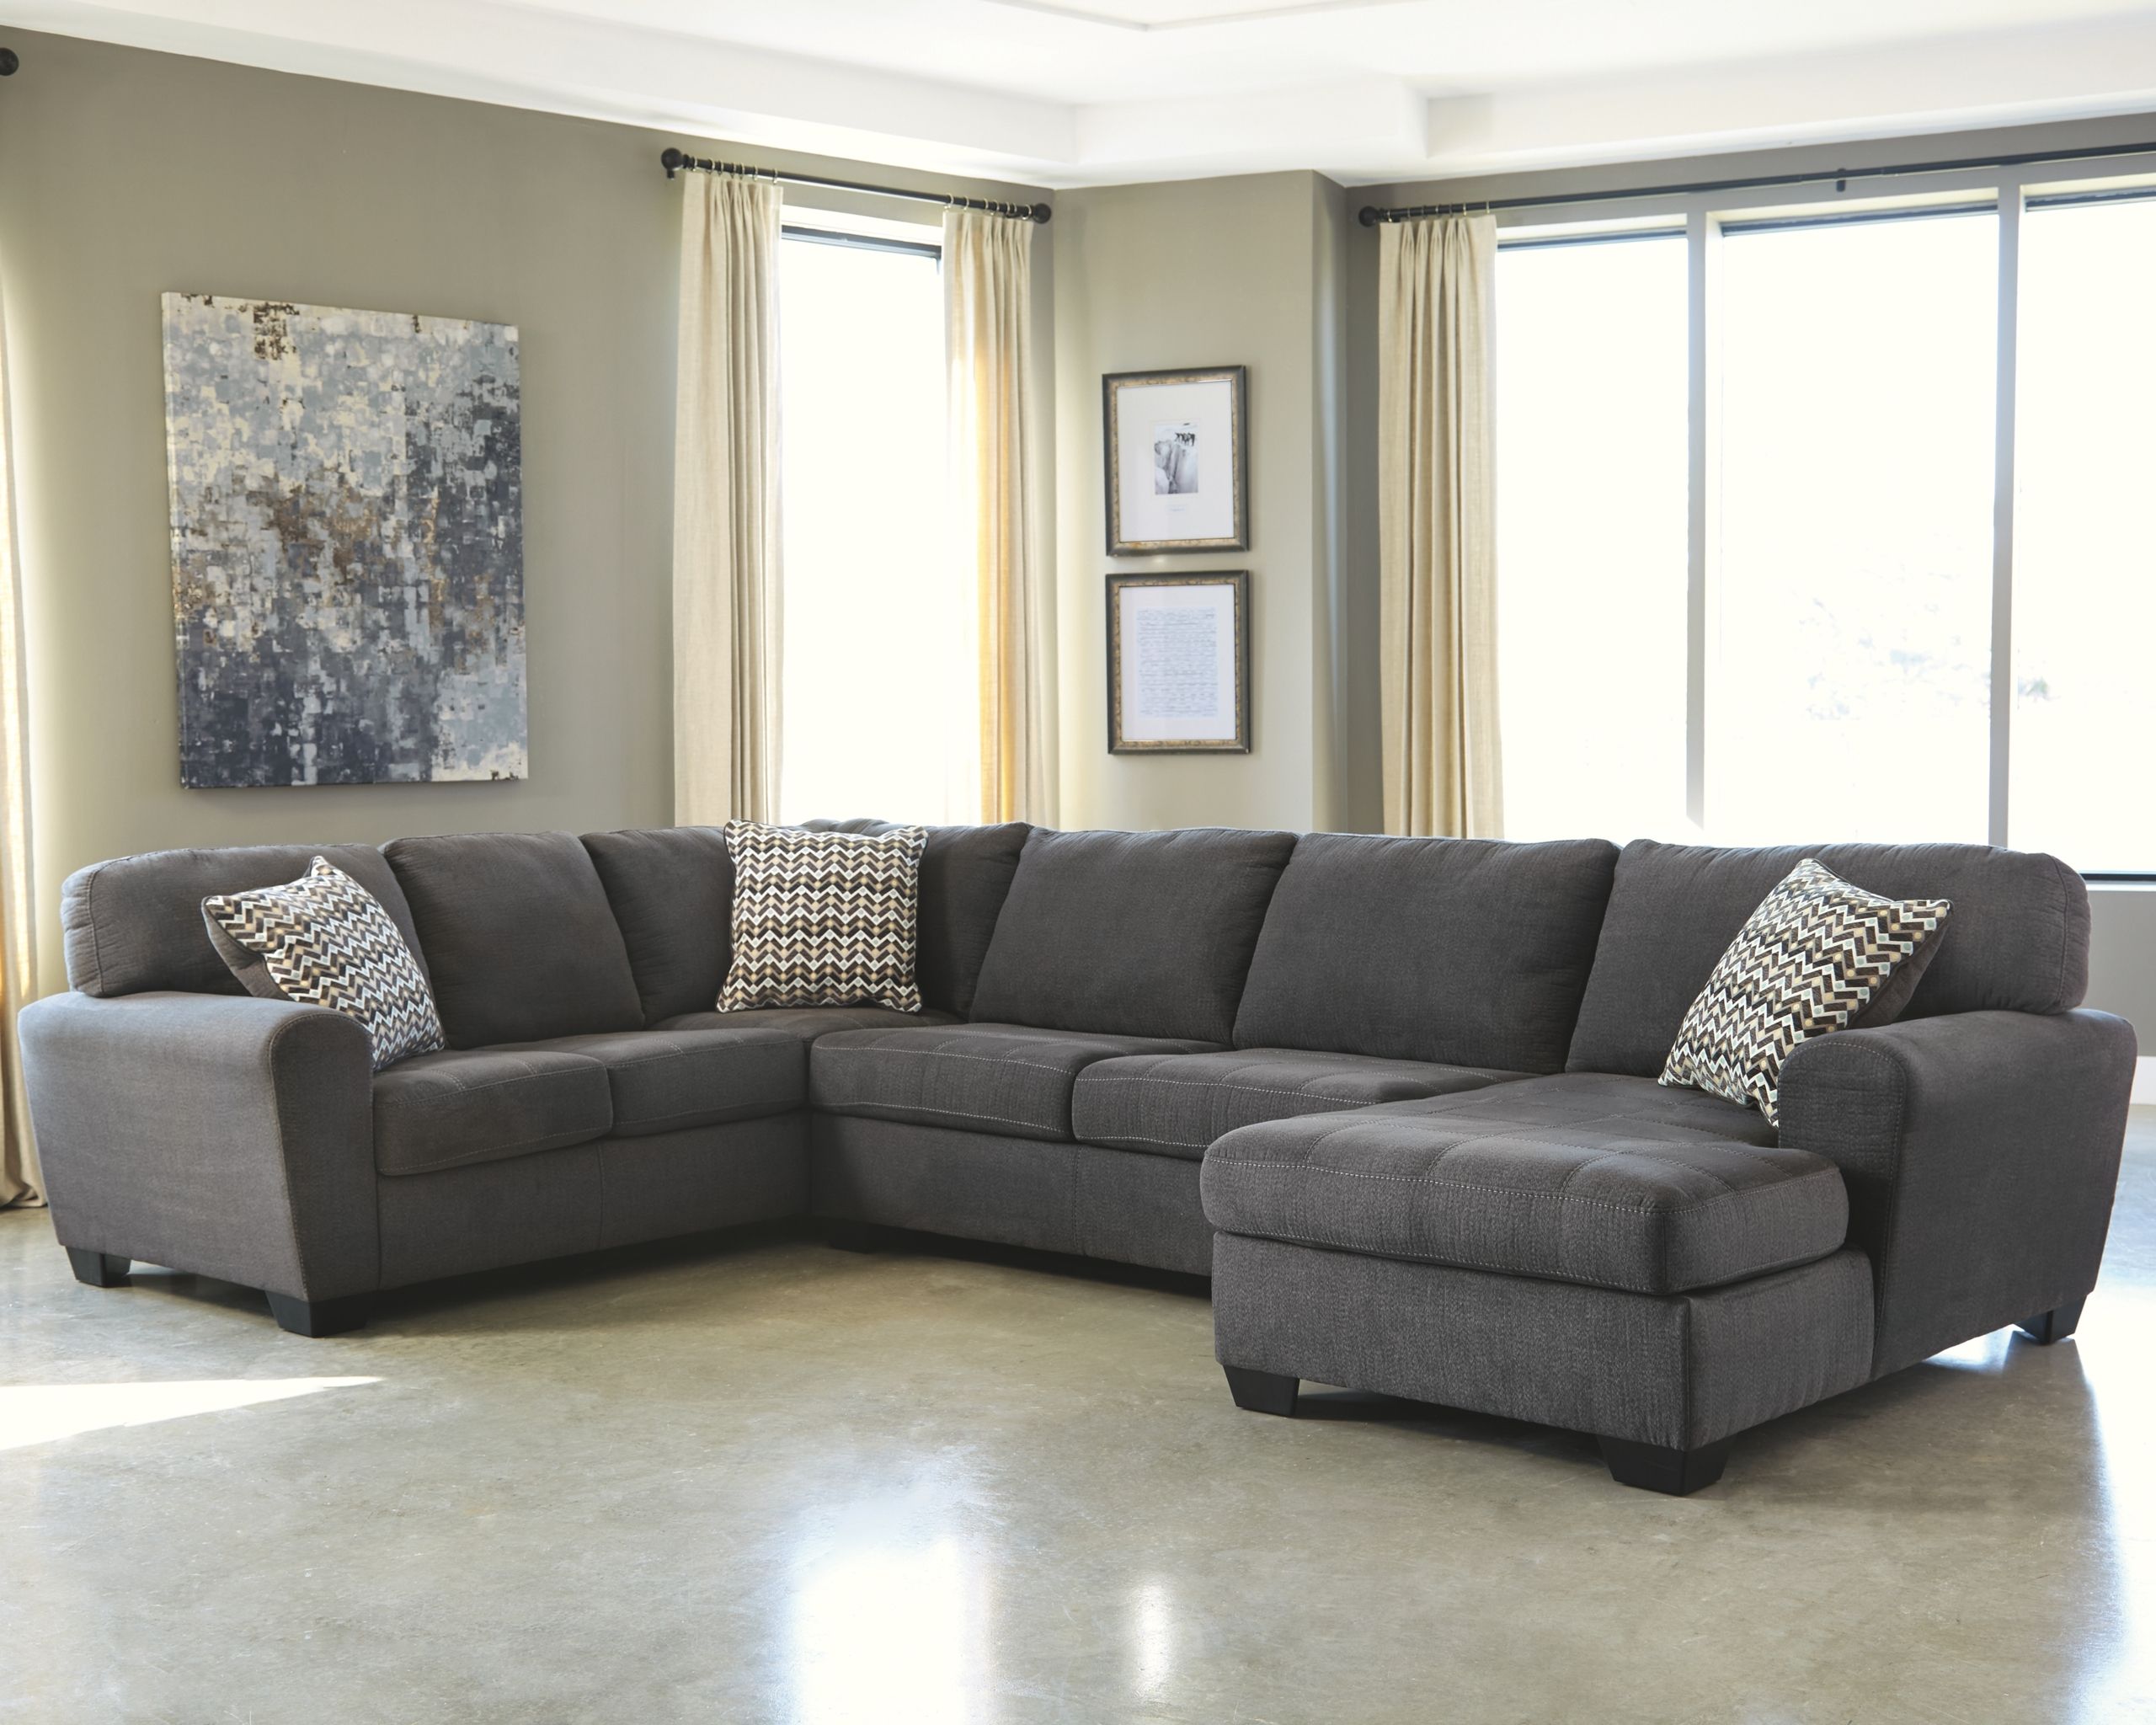 Grey Sectional Living Room Ideas – Foter Intended For Dark Gray Sectional Sofas (View 7 of 15)